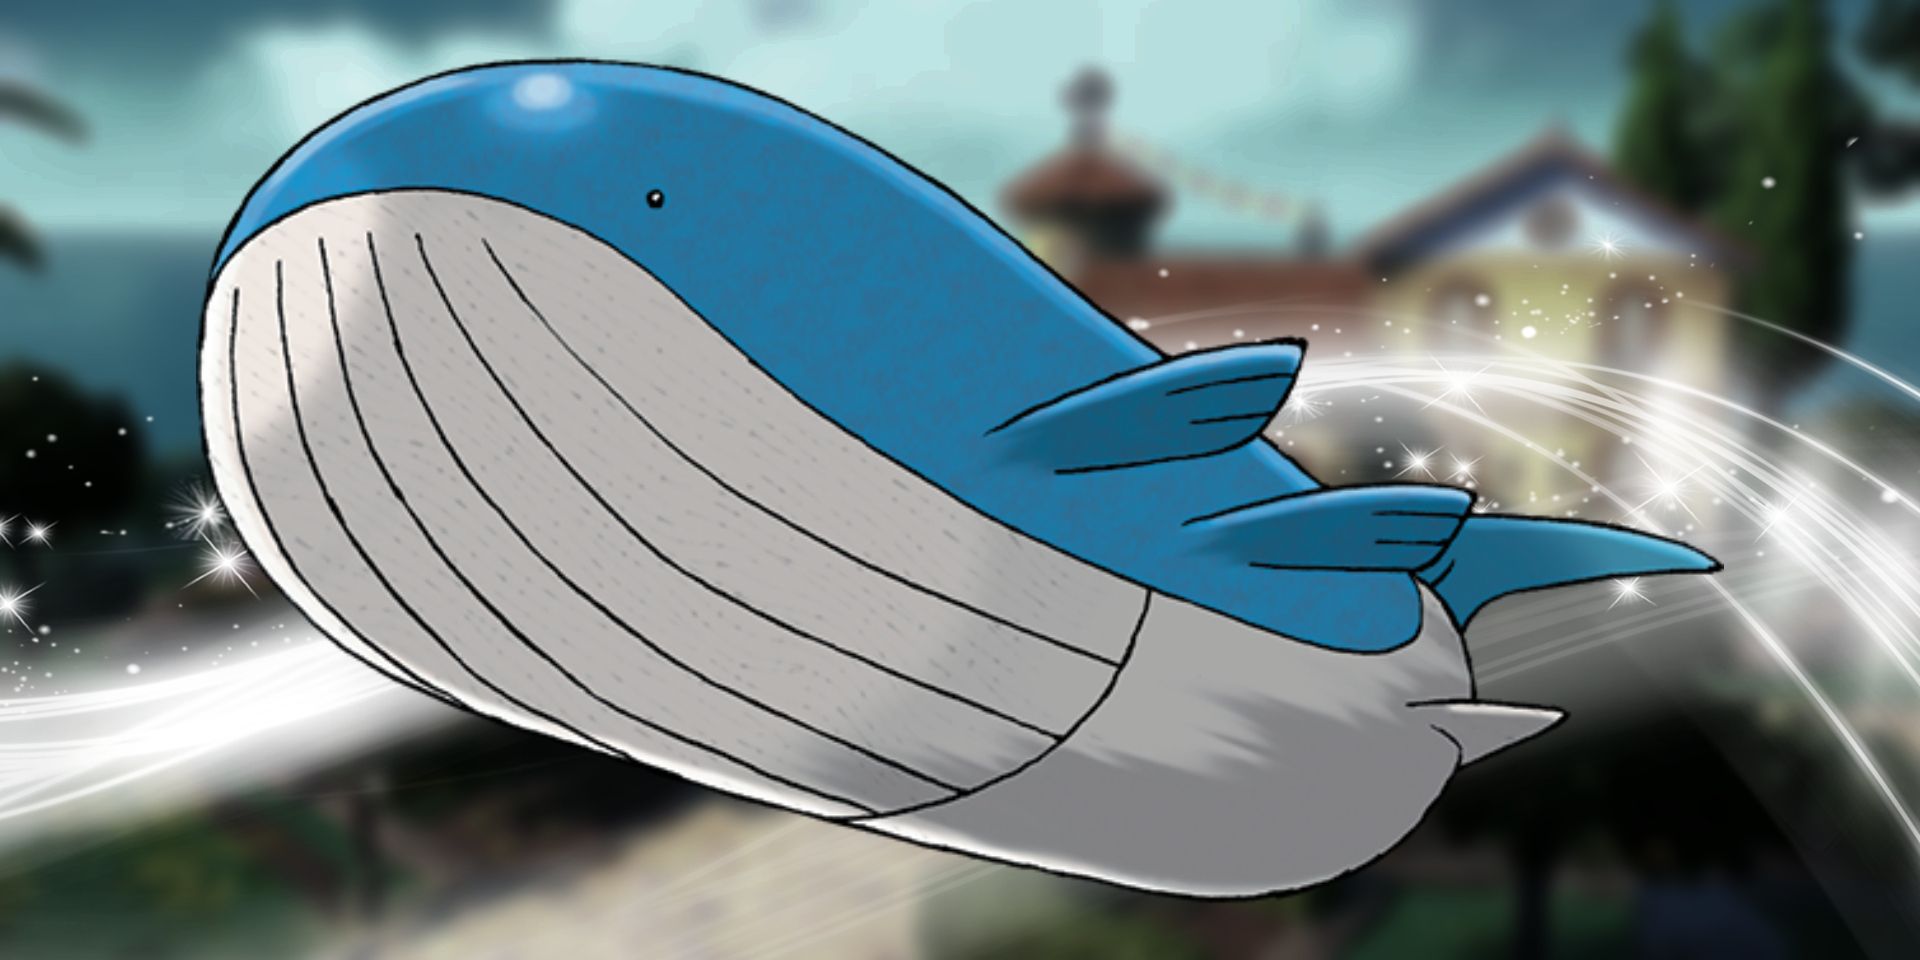 Pokemon's Wailord in the middle. Behind it is a white flowing and sparkling effect.